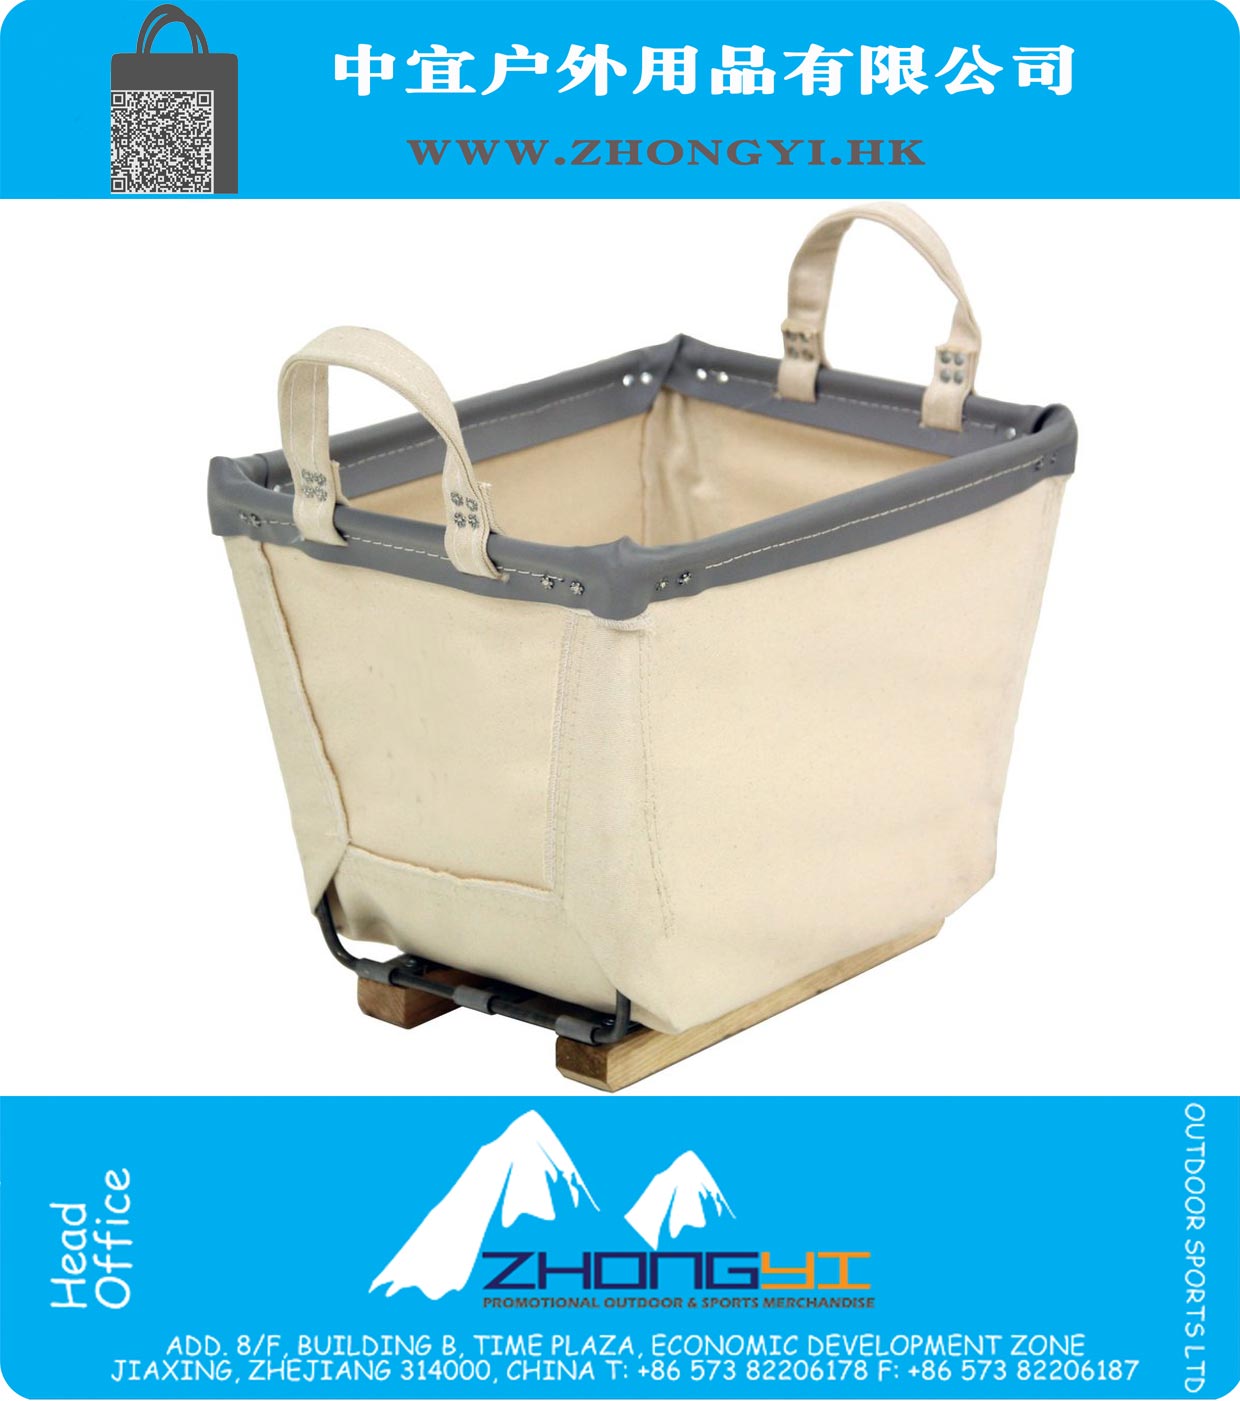 Canvas Small Carry Basket